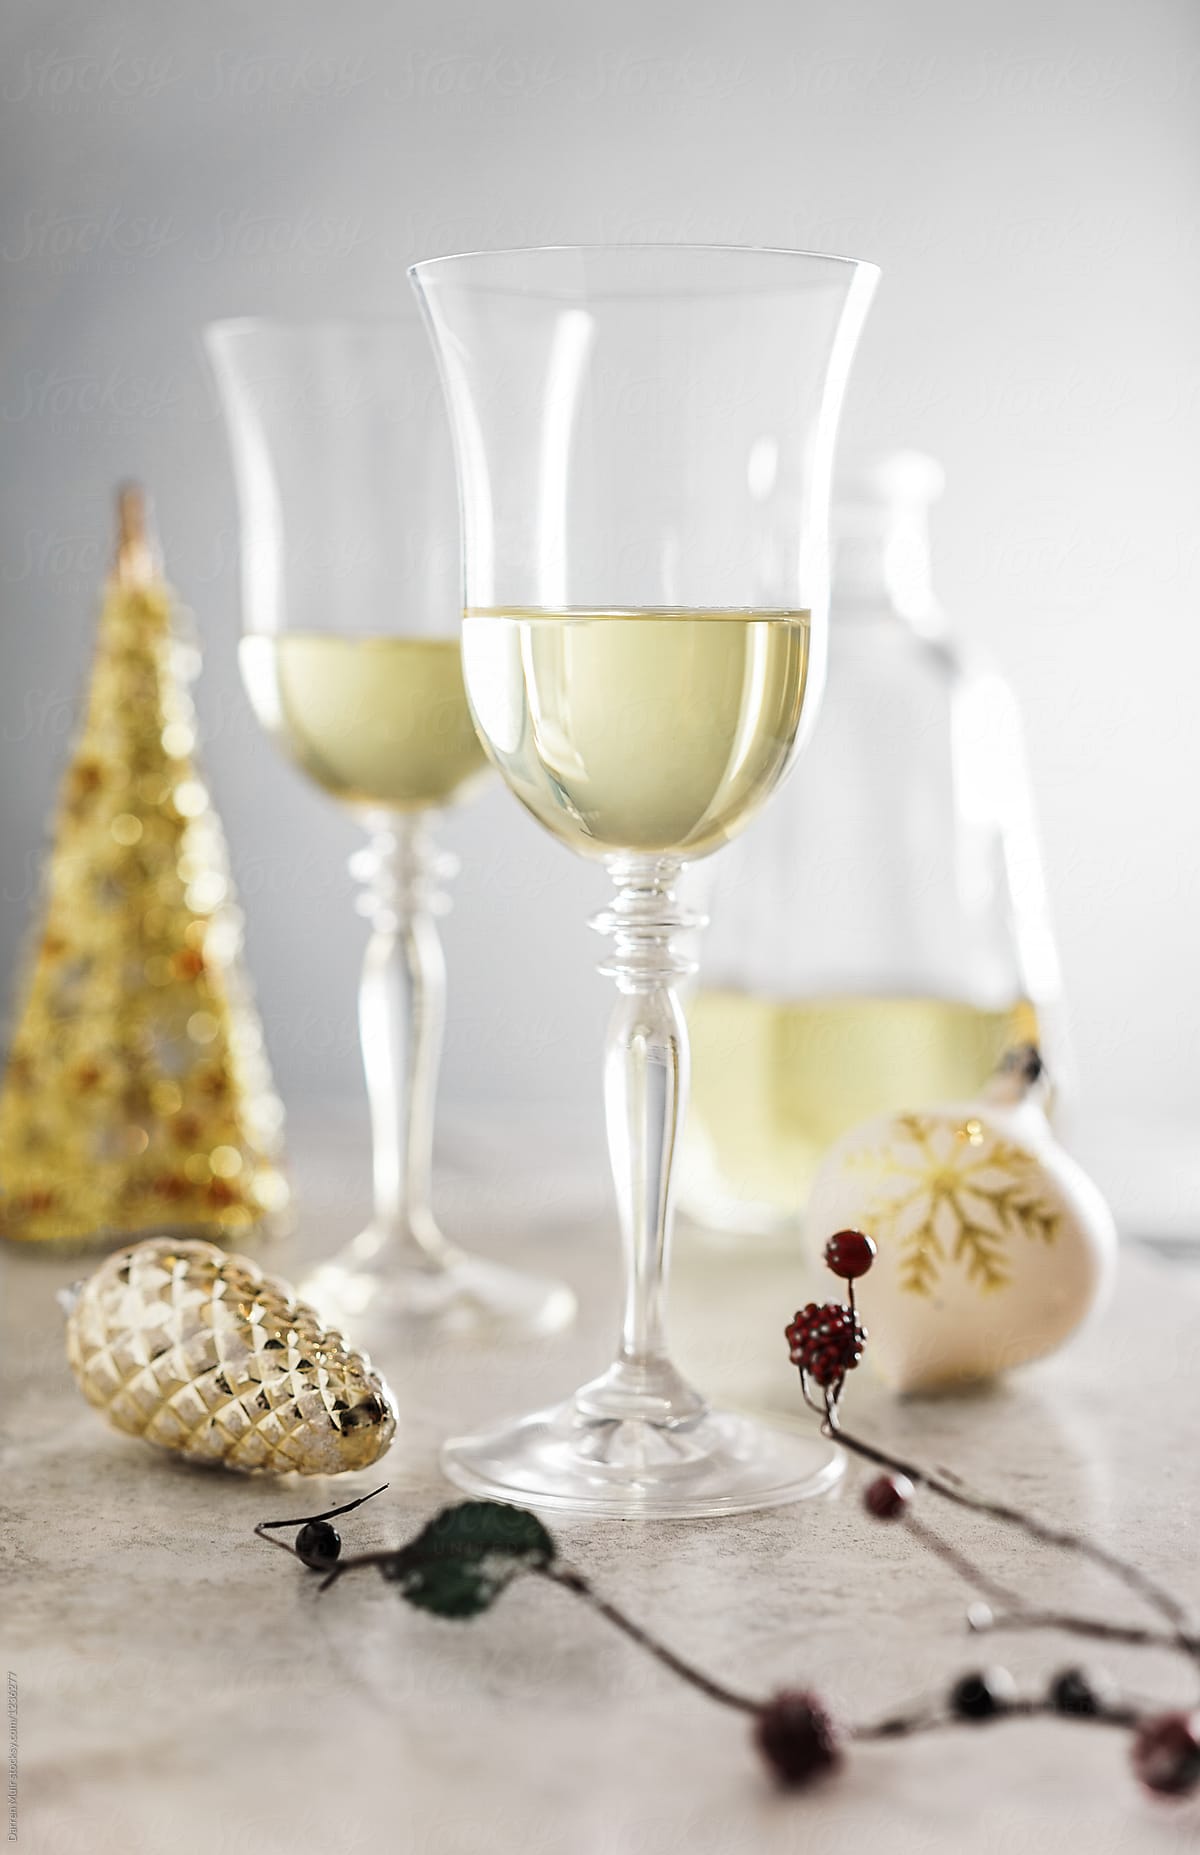 Two glasses of white wine in a festive setting.